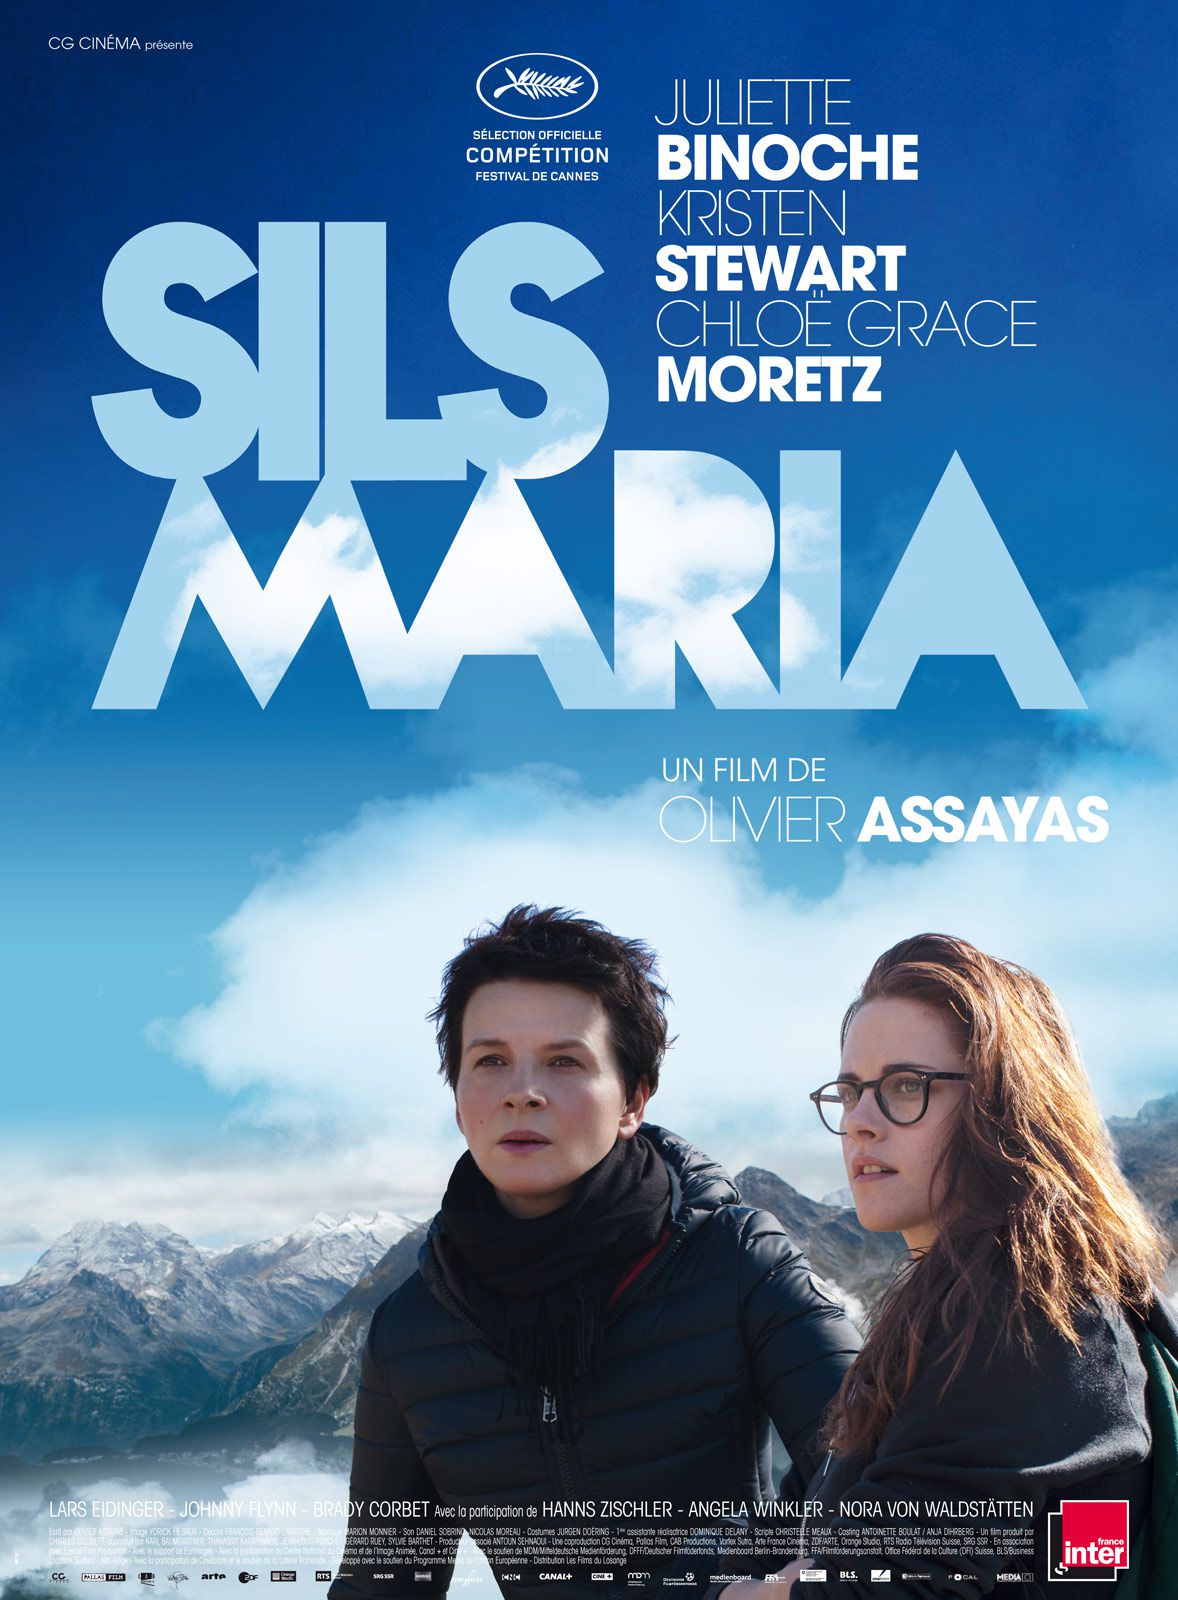 Sils Maria - Film (2014) streaming VF gratuit complet